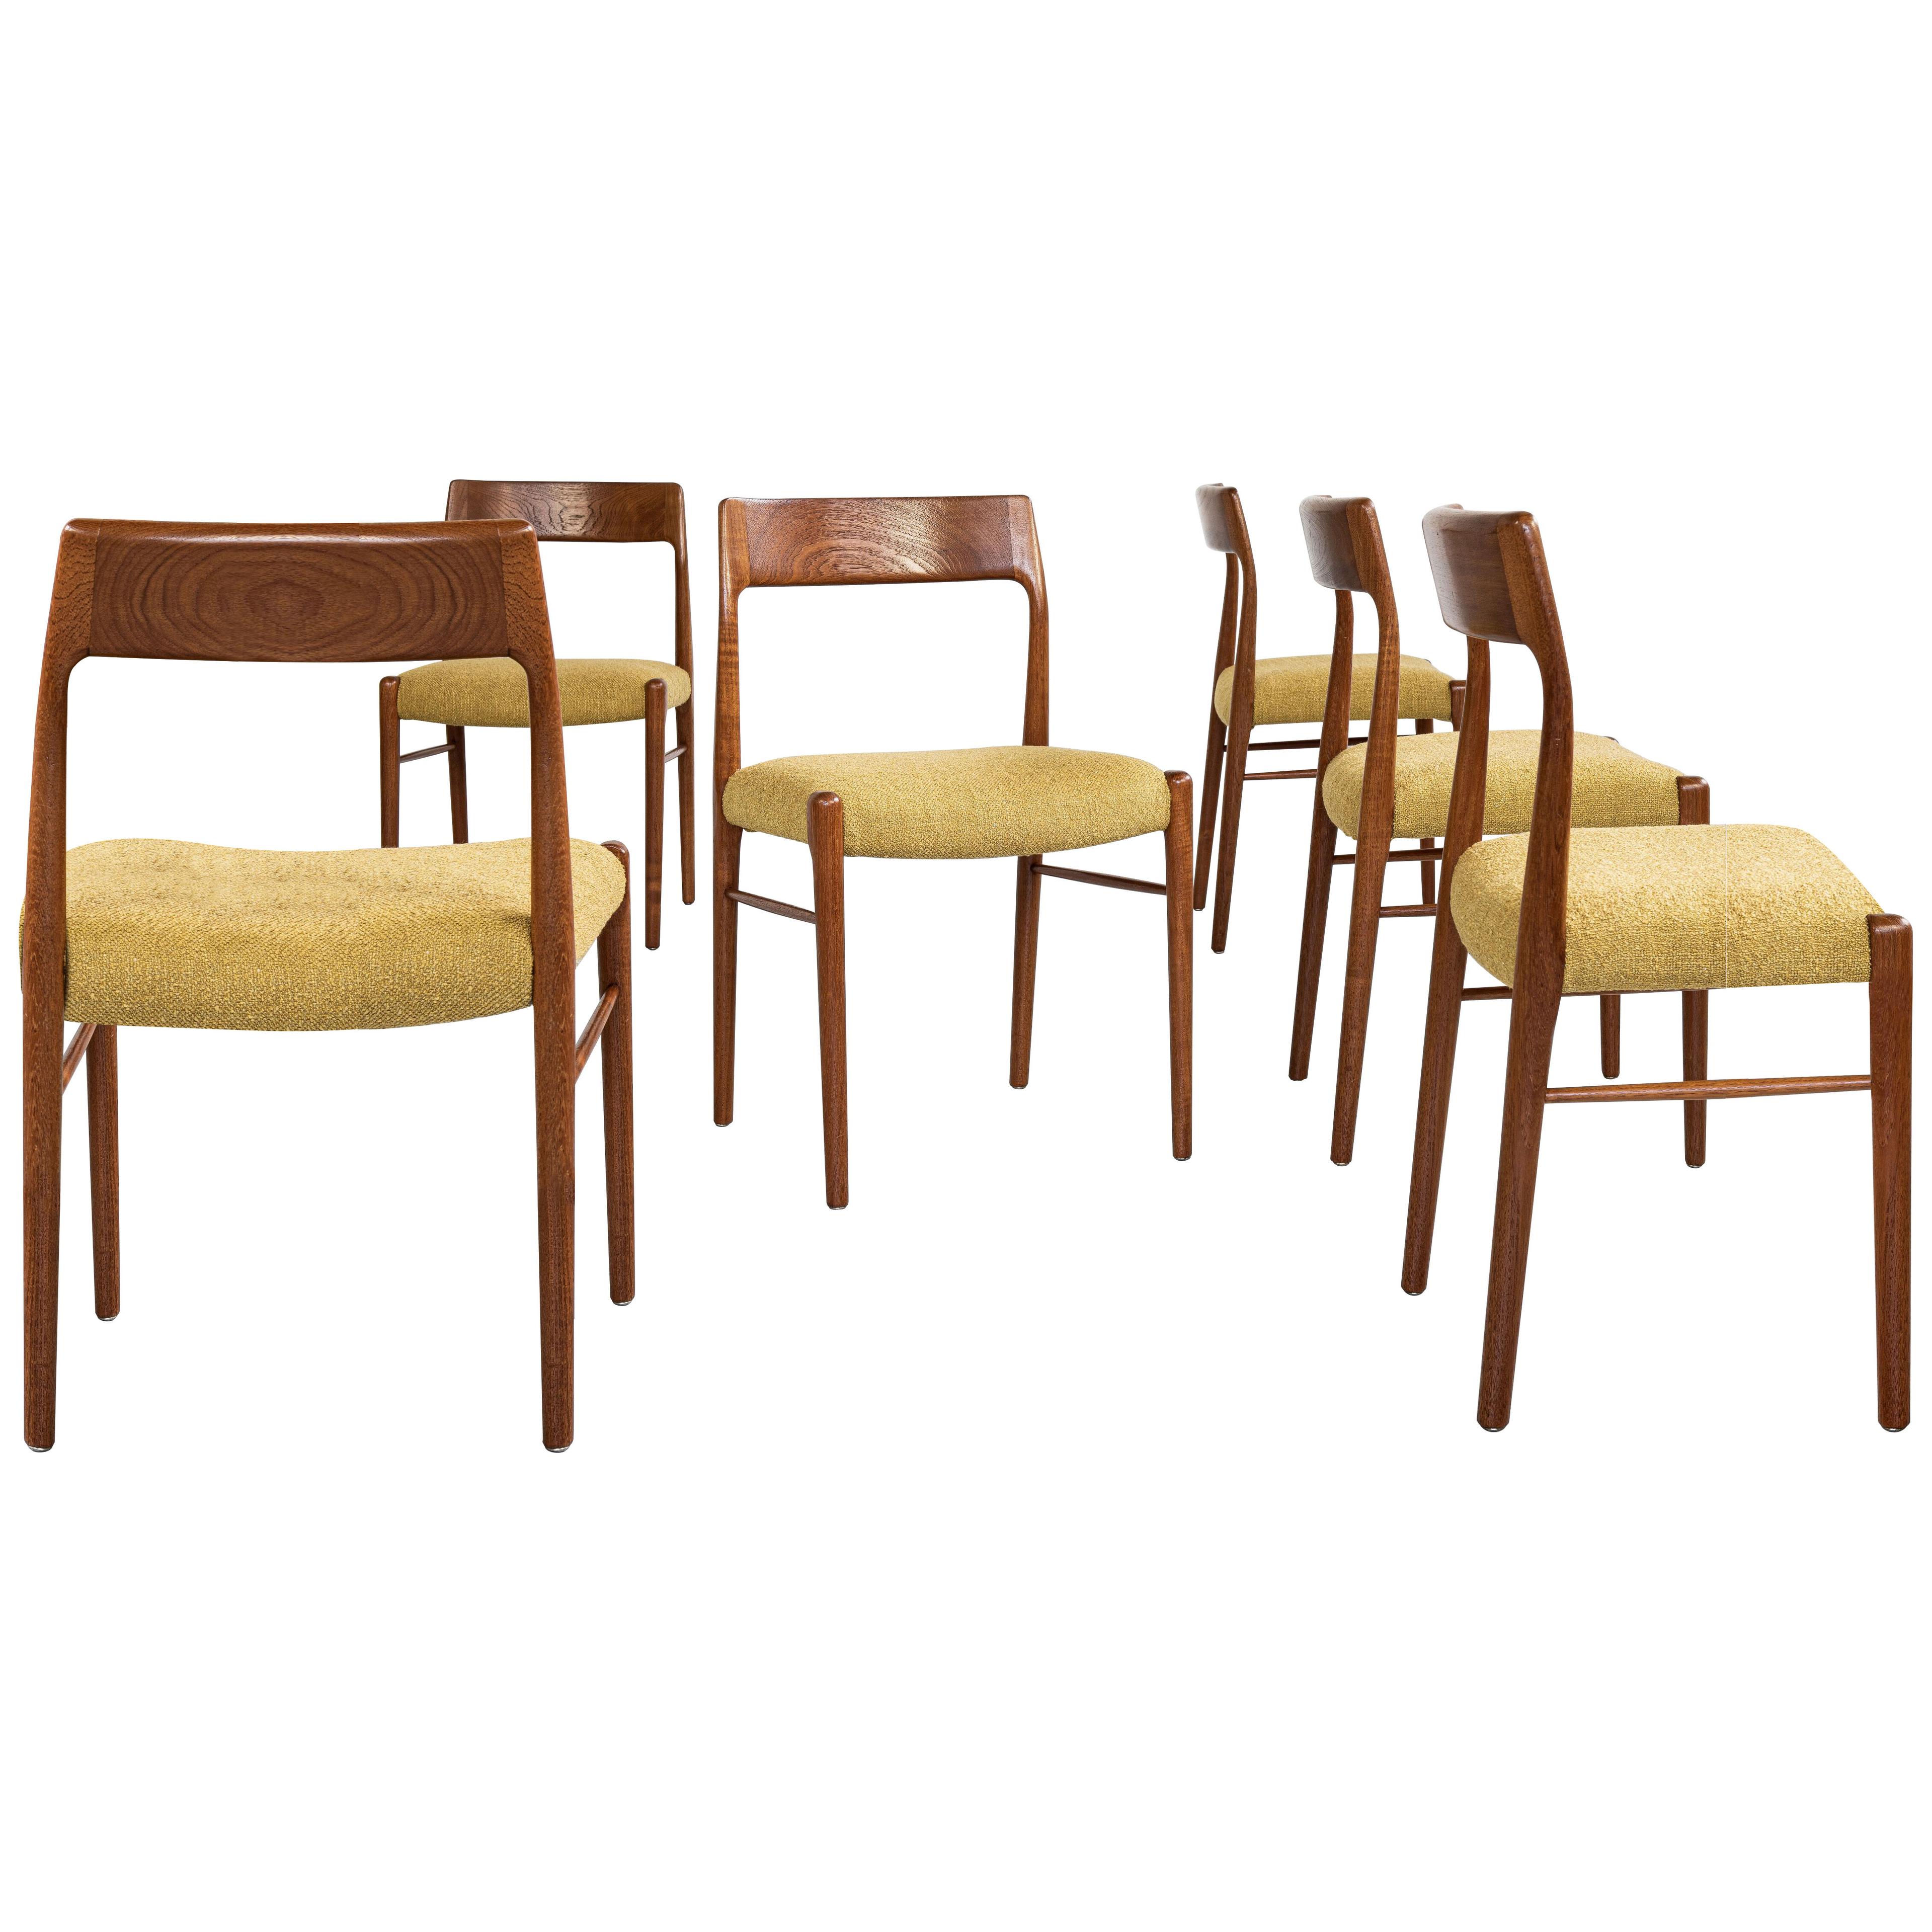 Midcentury Danish set of 6 dining chairs in teak with new fabric 1960s